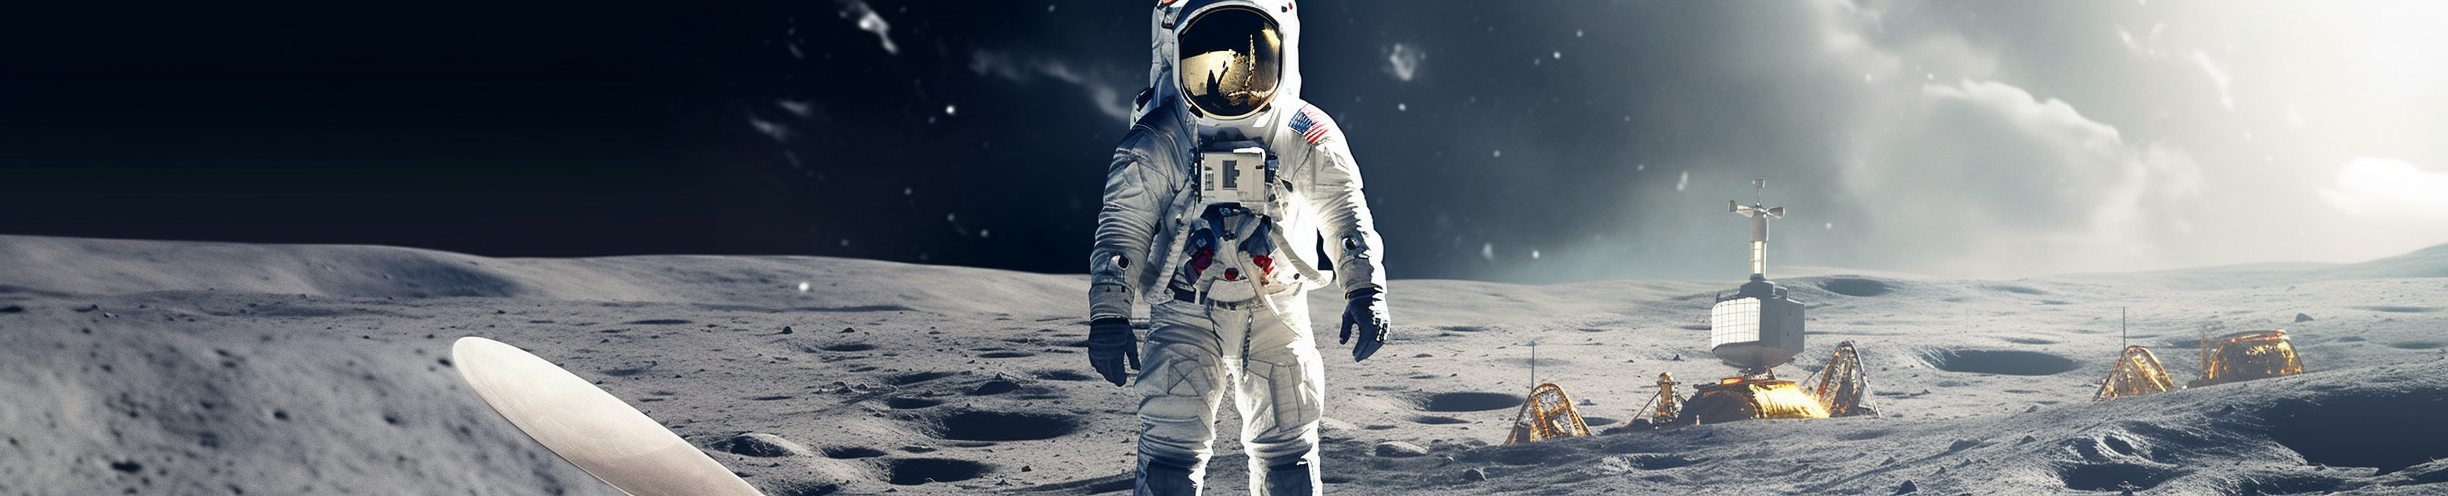 The Moon Landing: A Grand Deception or a Giant Leap for Mankind?